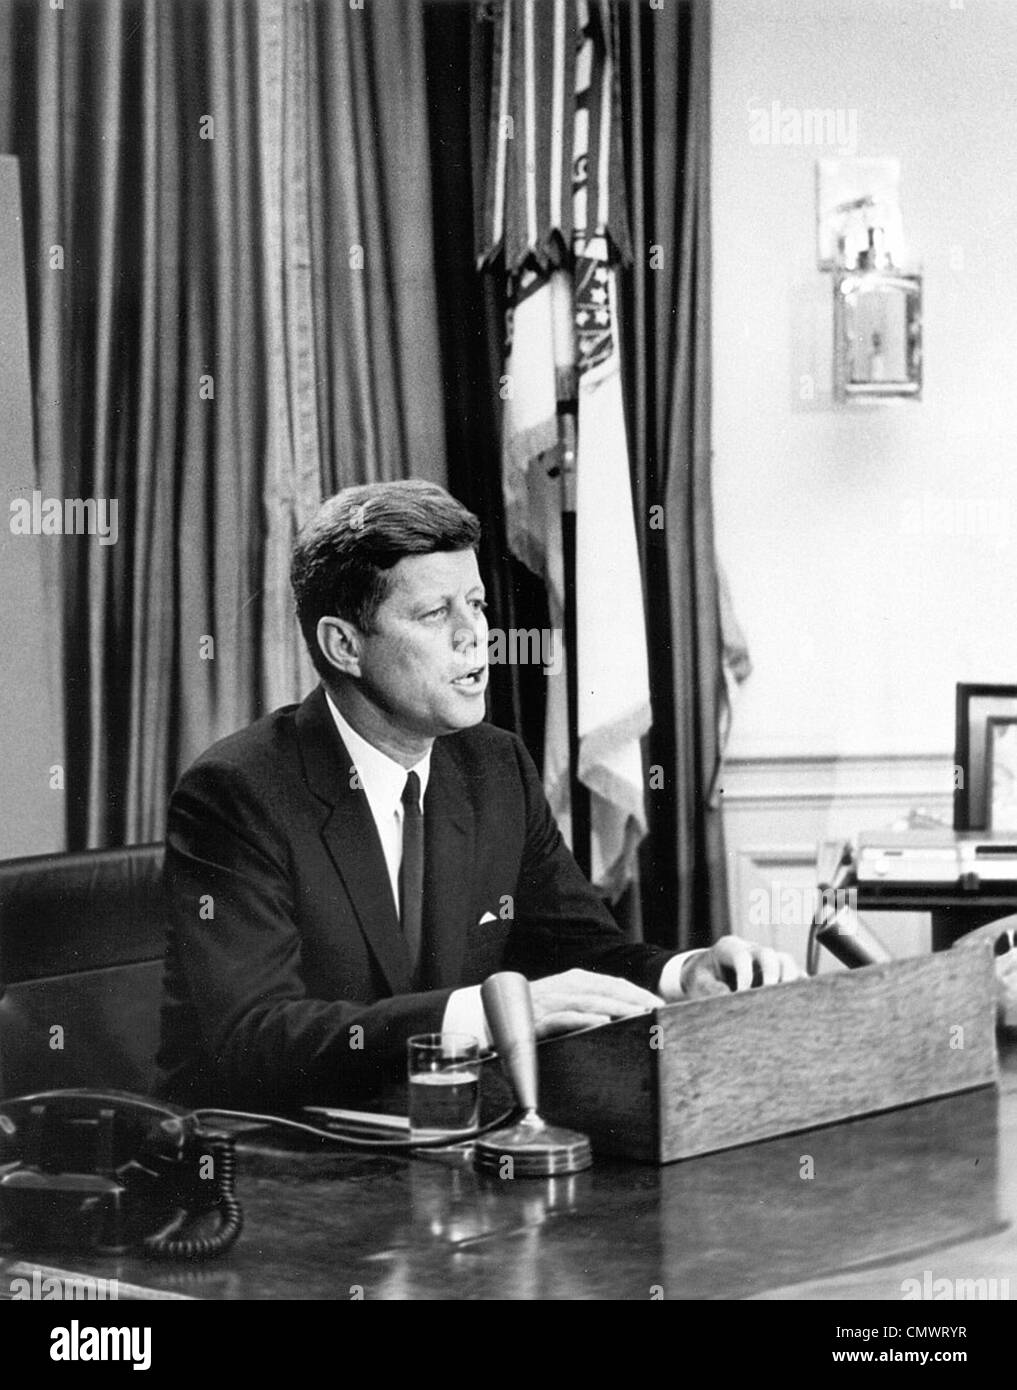 JOHN F KENNEDY (1917-1963) making his televised speech on Civil Rights on 11 June 1963 Stock Photo